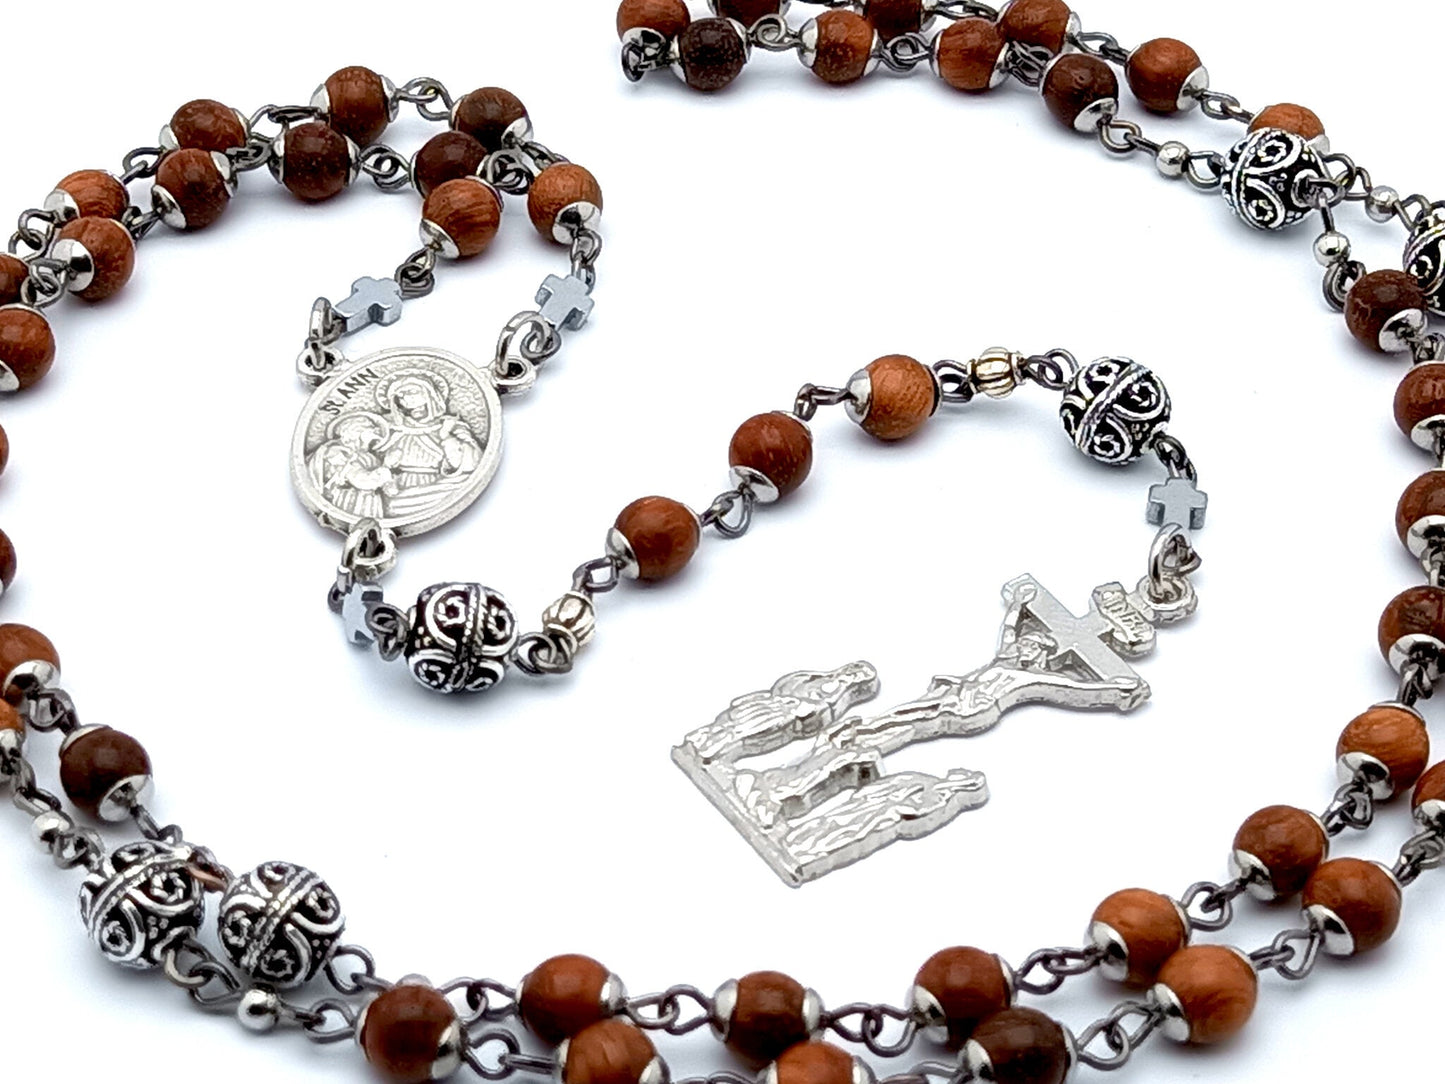 Saint Anne wooden unique rosary beads with Bali beads and two Marys and Saint John at the foot of the cross crucifix